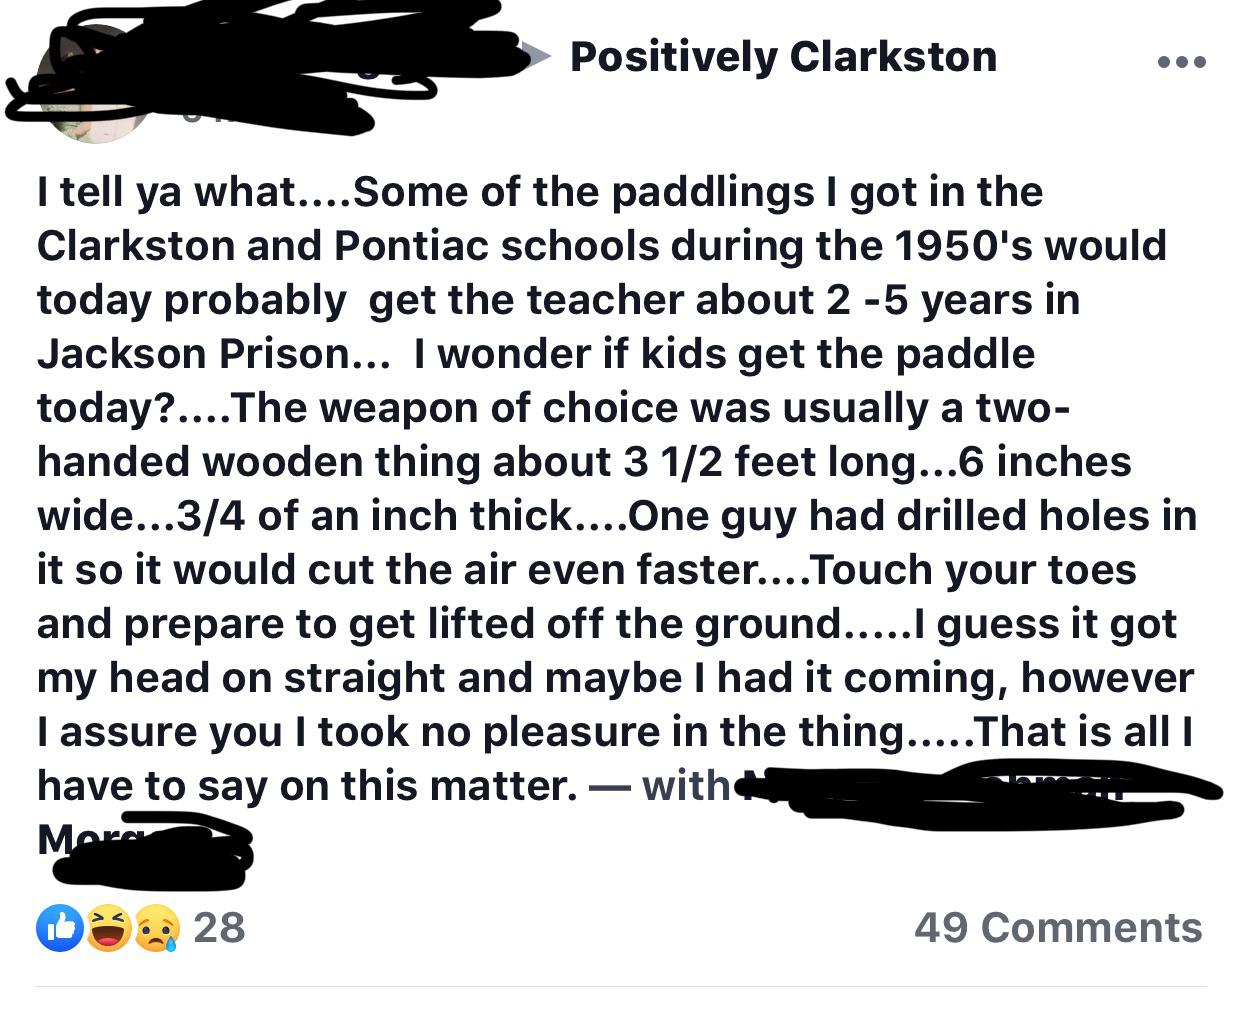 animal - Positively Clarkston I tell ya what.... Some of the paddlings I got in the Clarkston and Pontiac schools during the 1950's would today probably get the teacher about 25 years in Jackson Prison... I wonder if kids get the paddle today?.... The wea